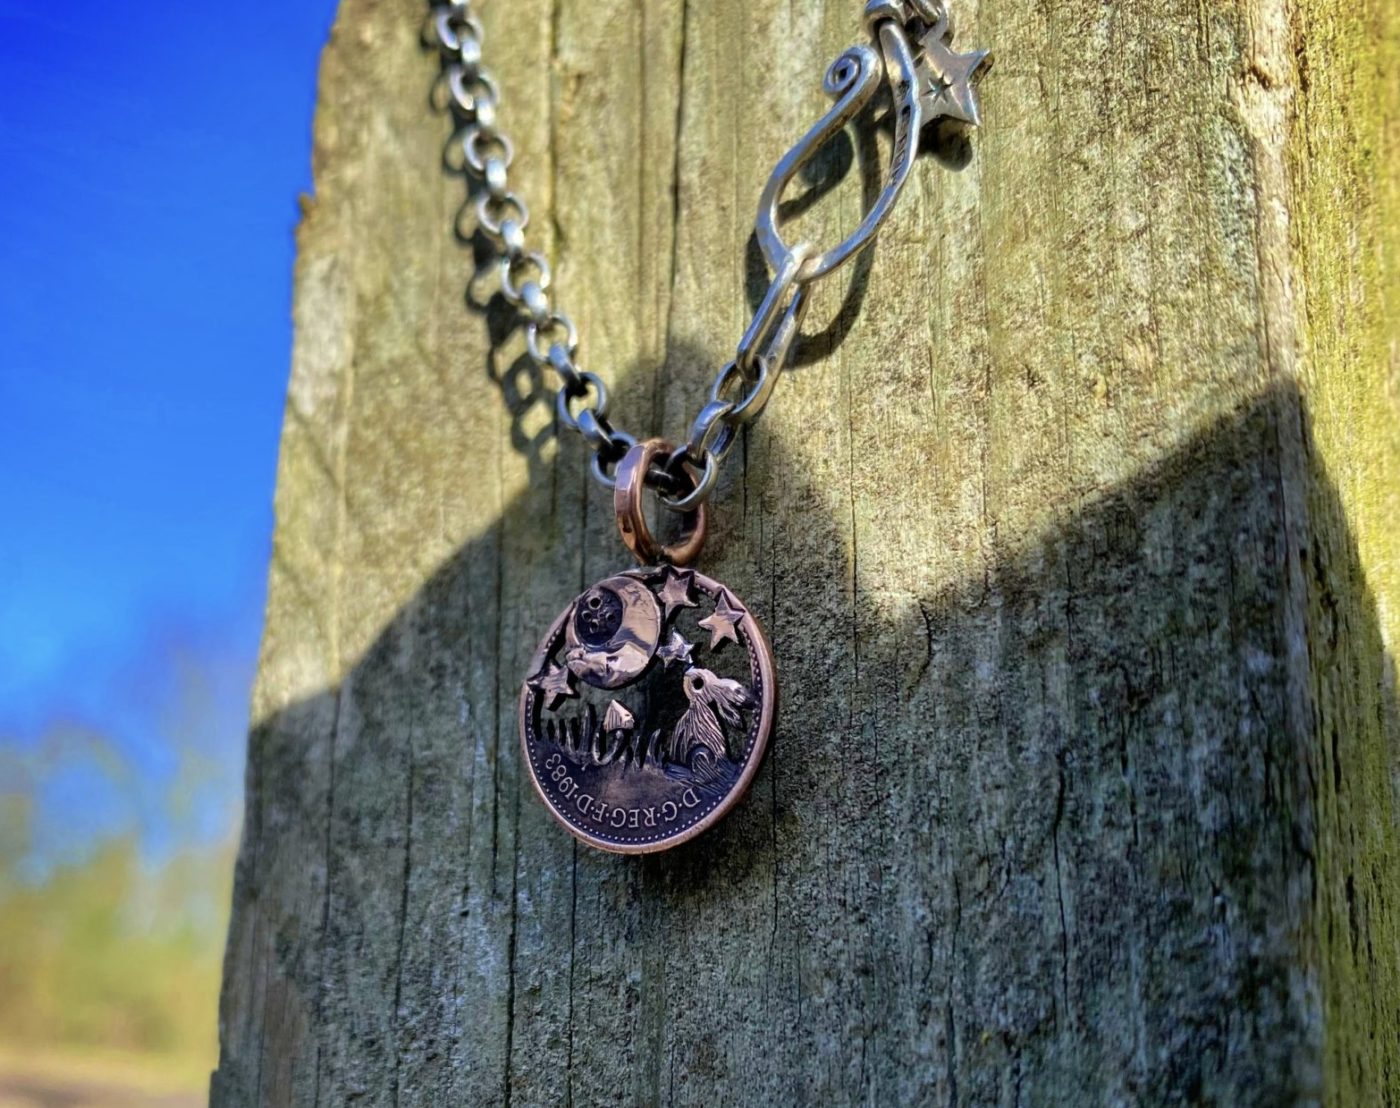 handmade and upcycled summer solstice Strawberry Moon gazing hare solstice coin necklace pendant